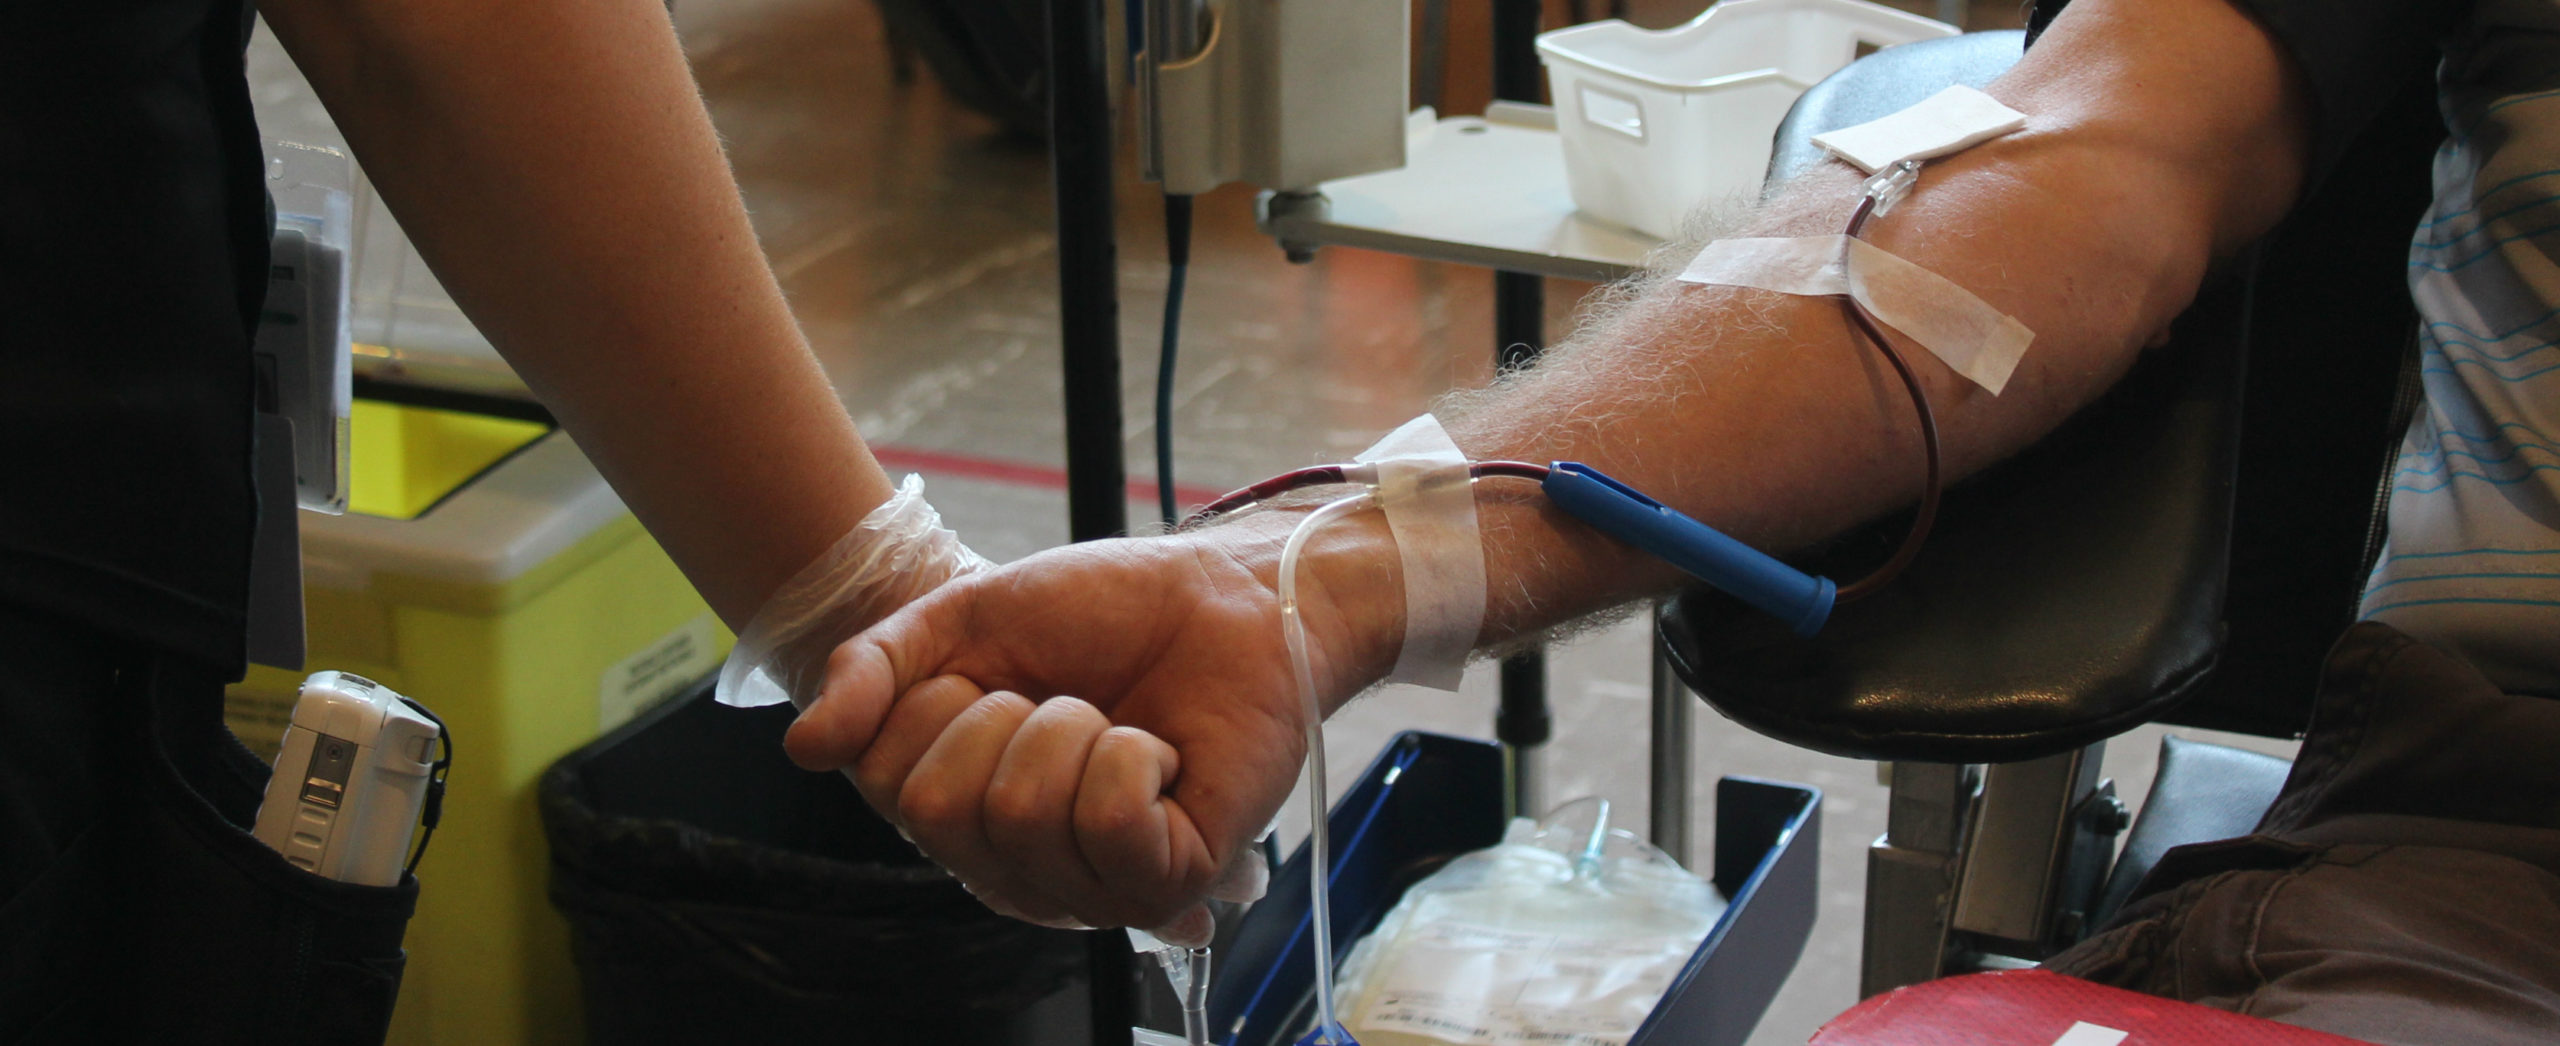 health canada approves ending blood donation ban for gay men scaled